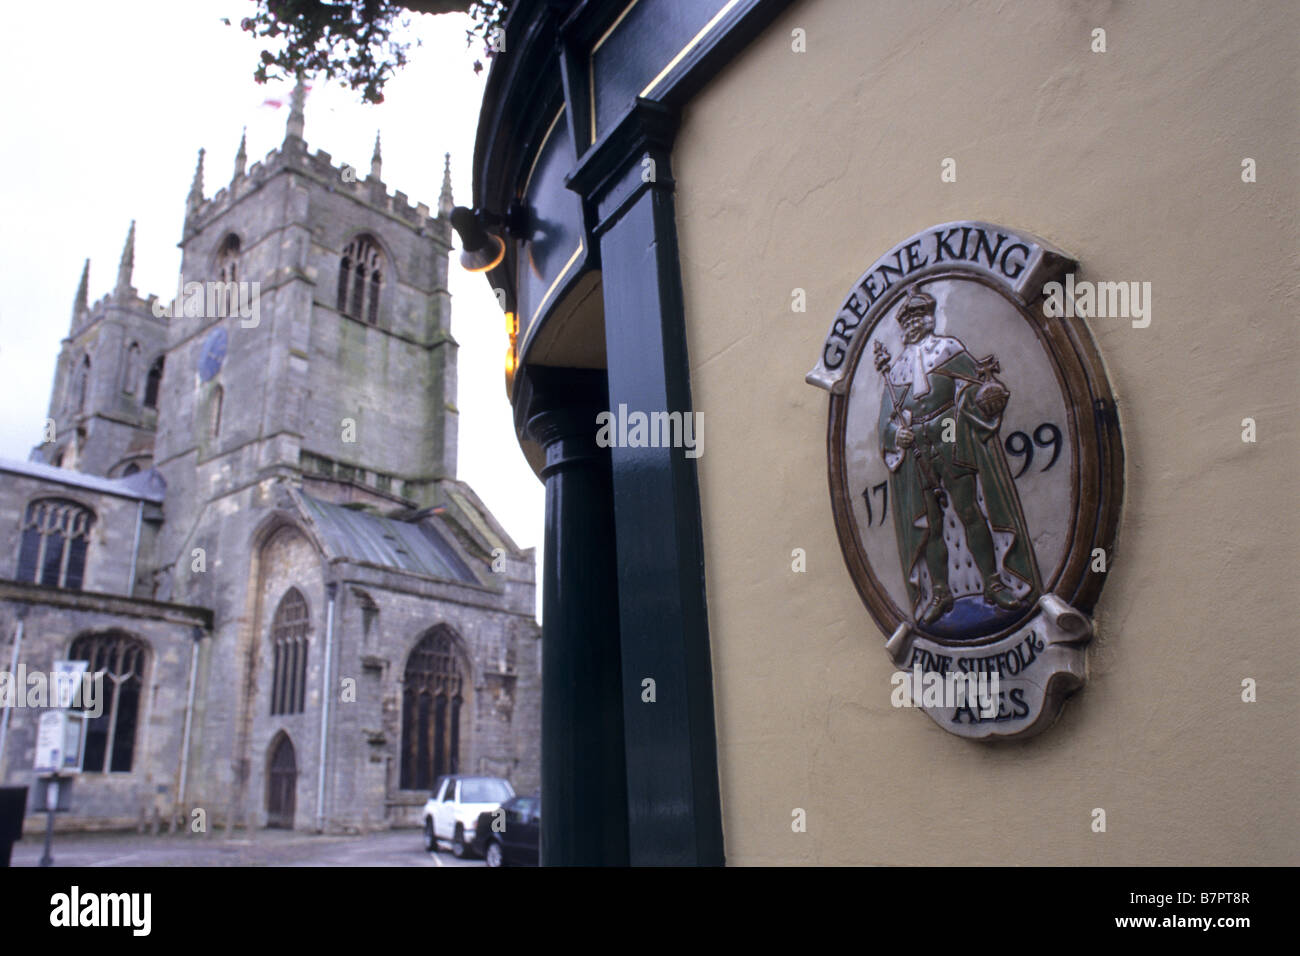 Cathedral & pub sign, UK Stock Photo